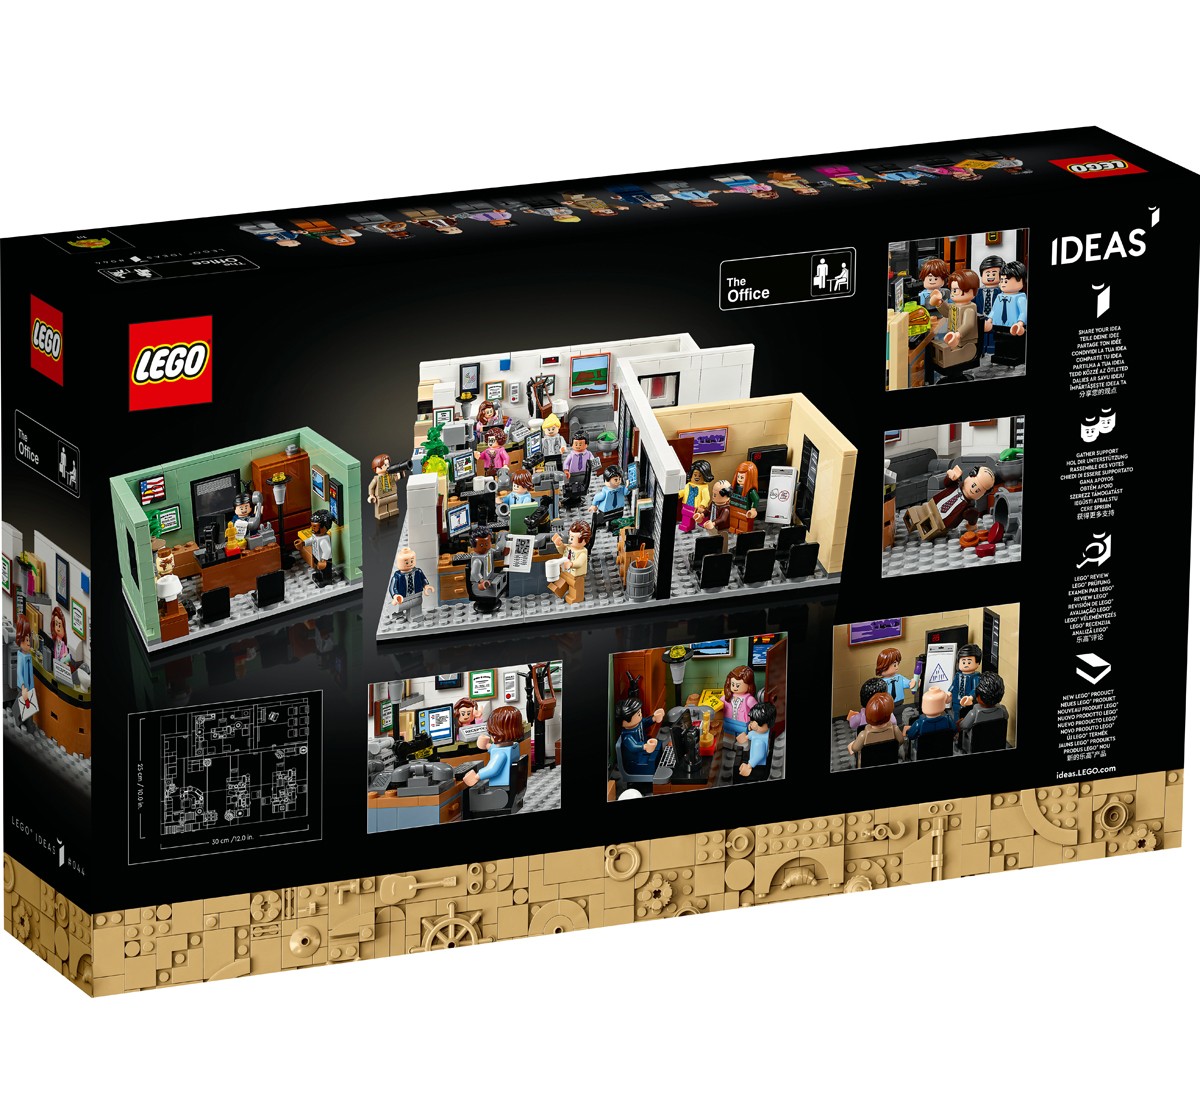 LEGO Ideas The Office 21336 Building Kit for Adults (1,164 Pieces), 18Y+